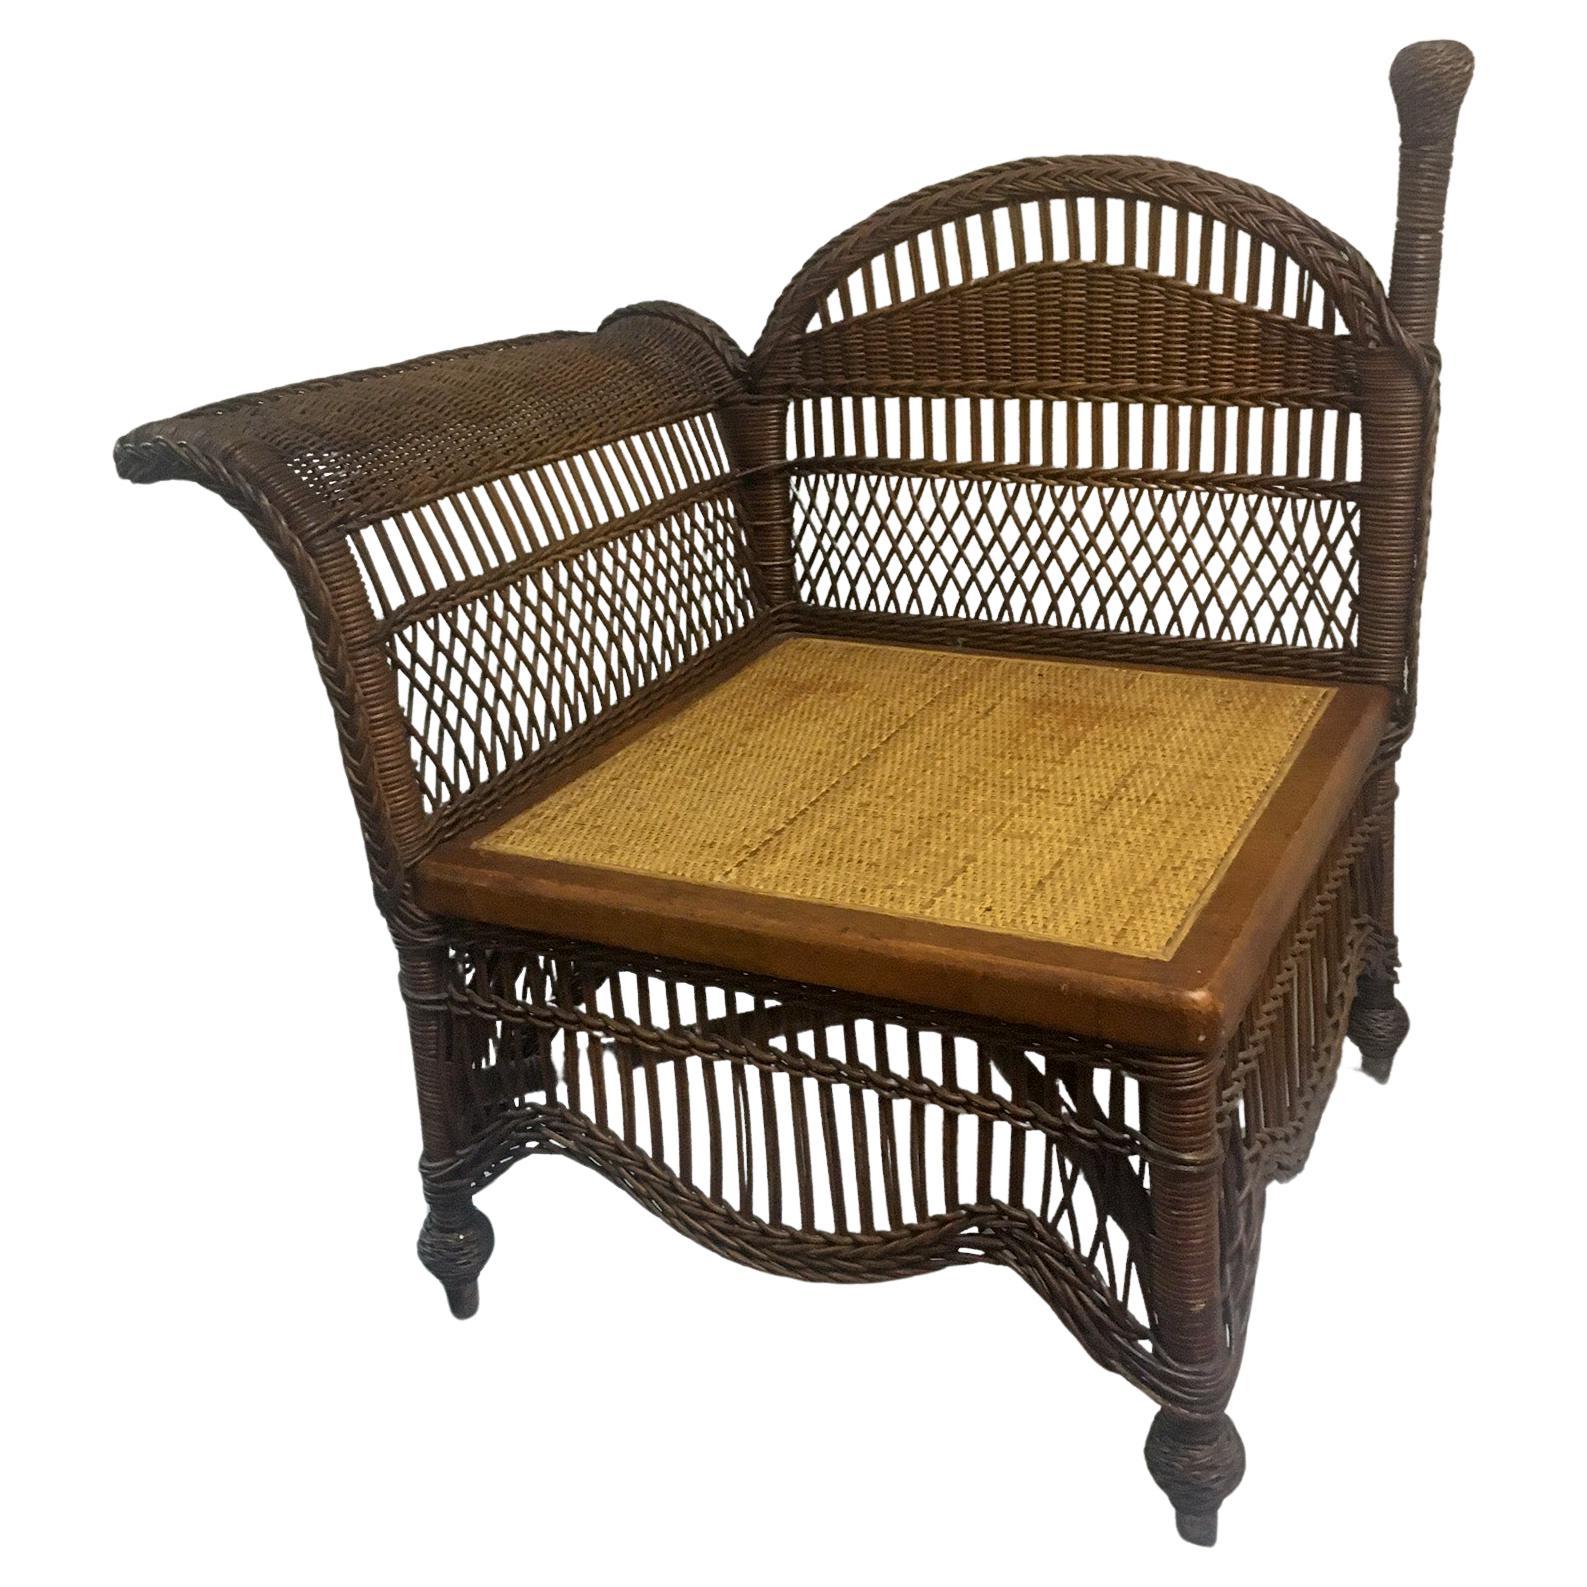 Heywood Wakefield Natural Wicker Divan or Photographer's Chair circa 1900 For Sale